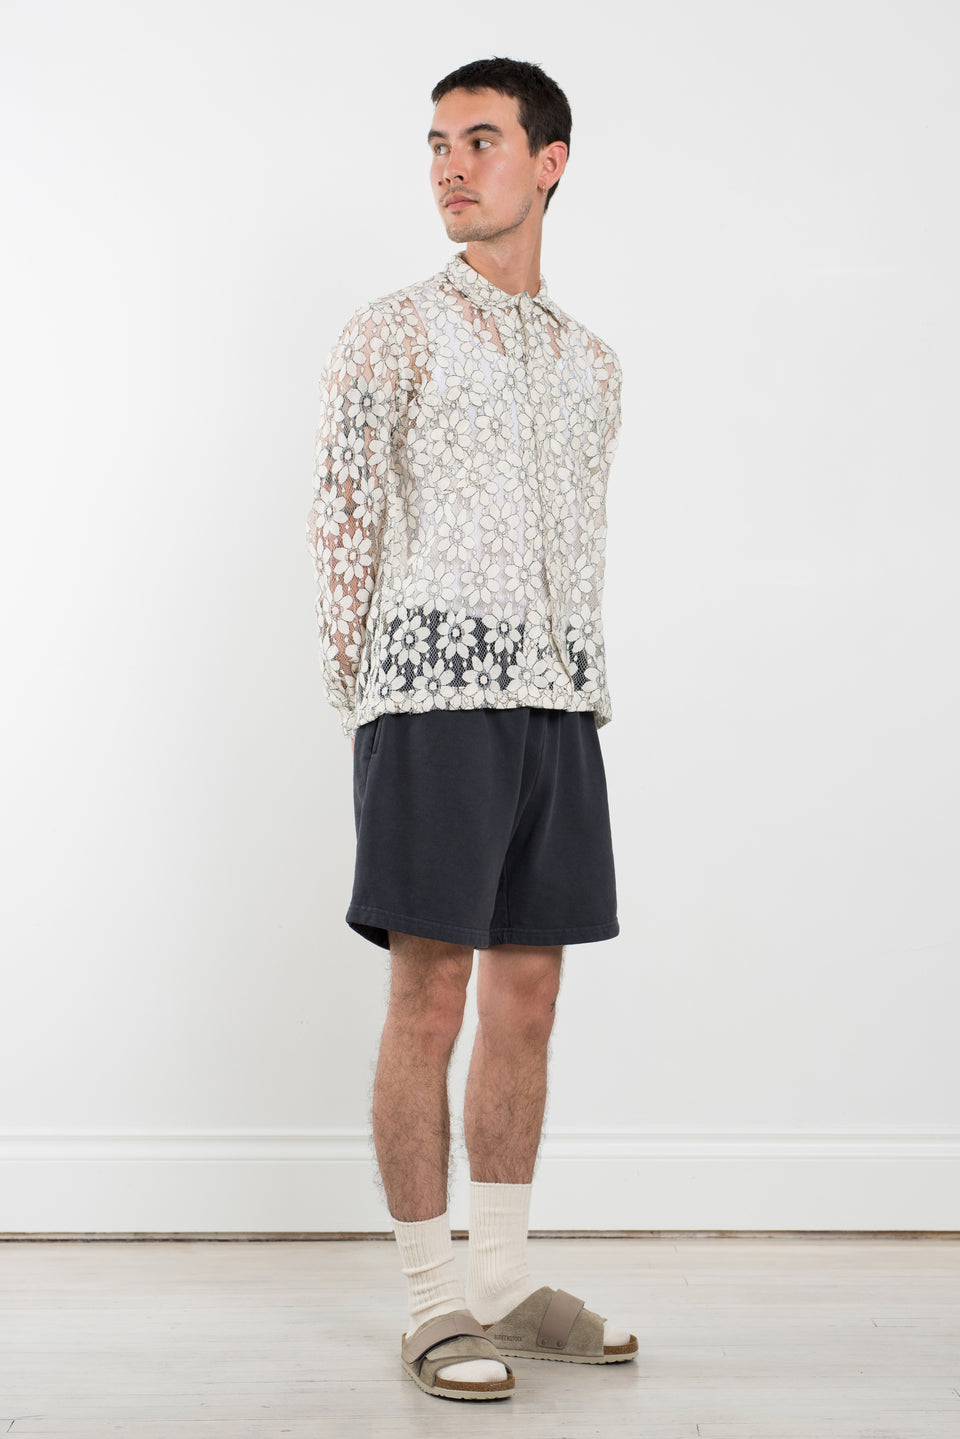 Bode Emily New York PF22 SS22 Daisy Lace LS Shirt White / Black Calculus Victoria BC Canada